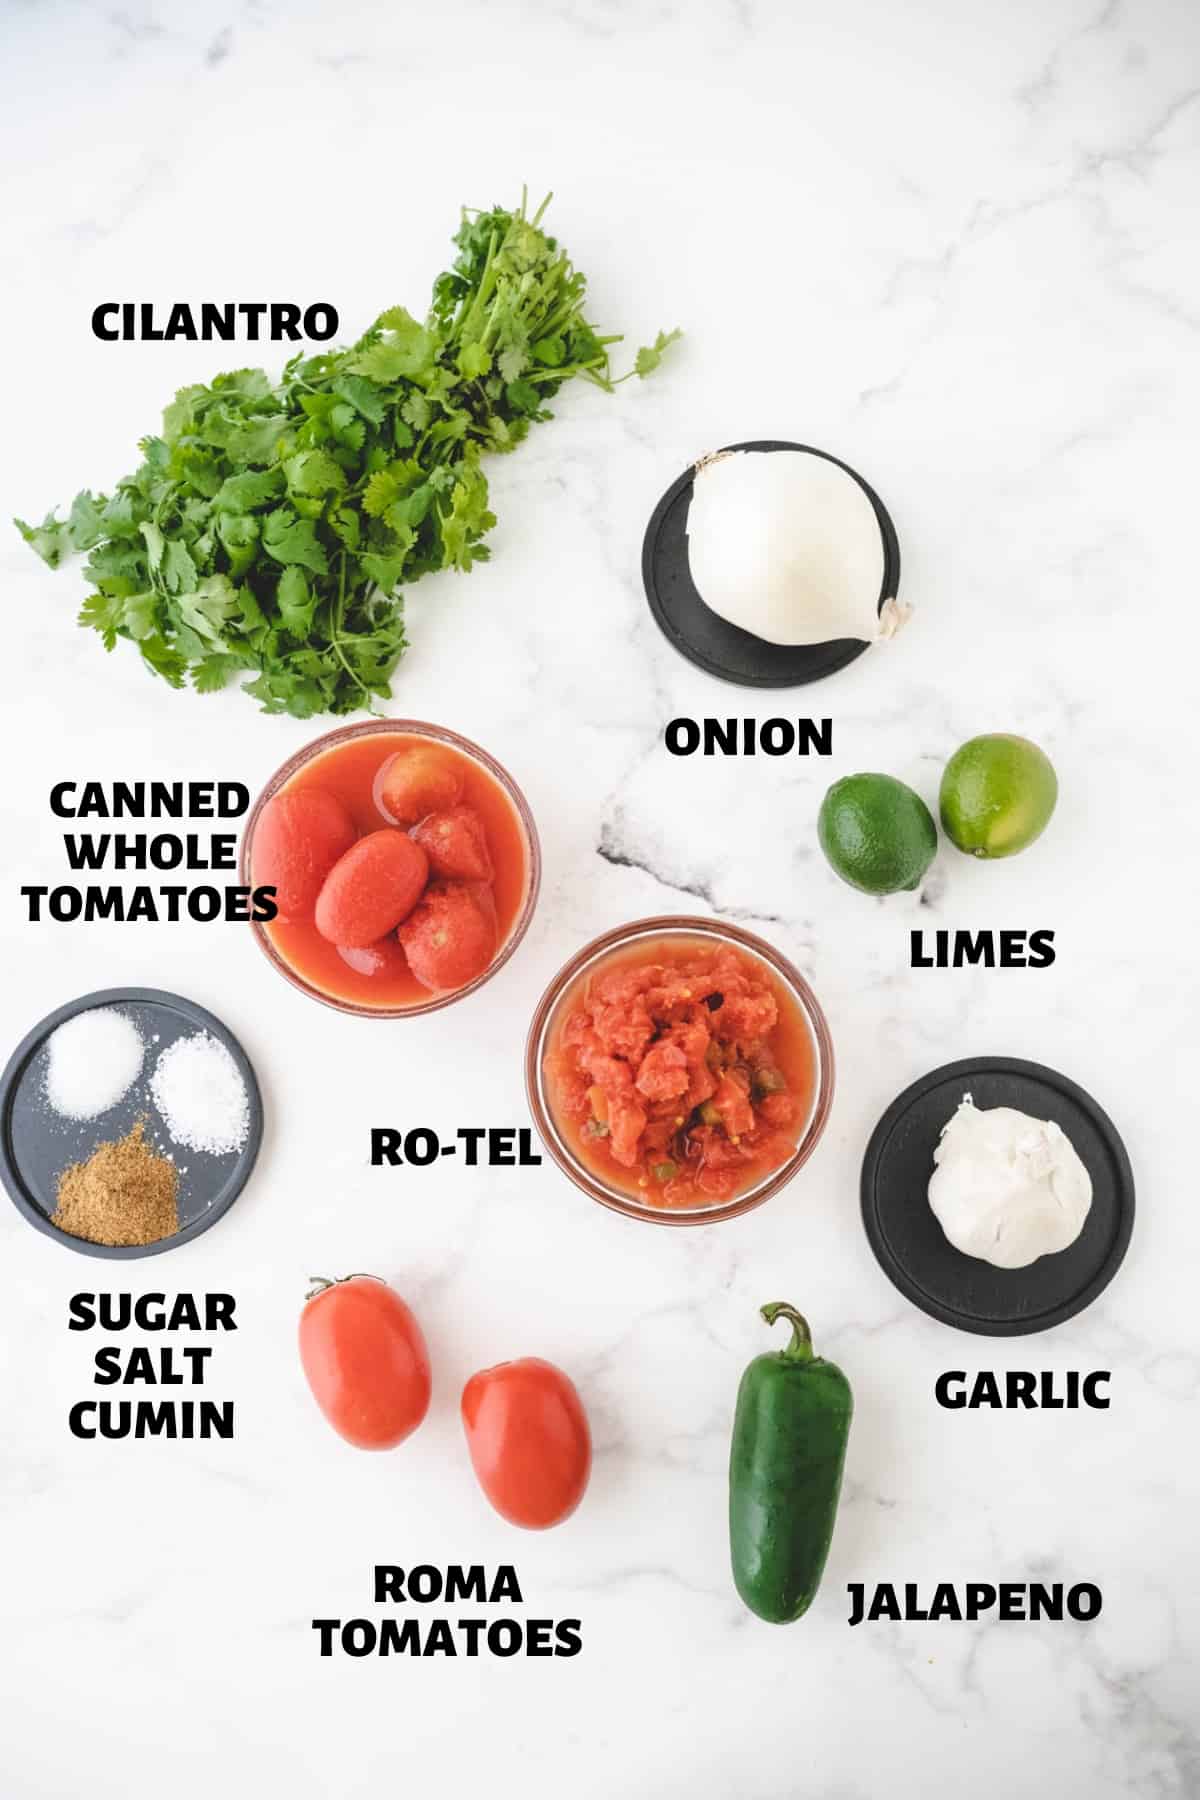 A labeled image of ingredients needed to make restaurant style salsa.